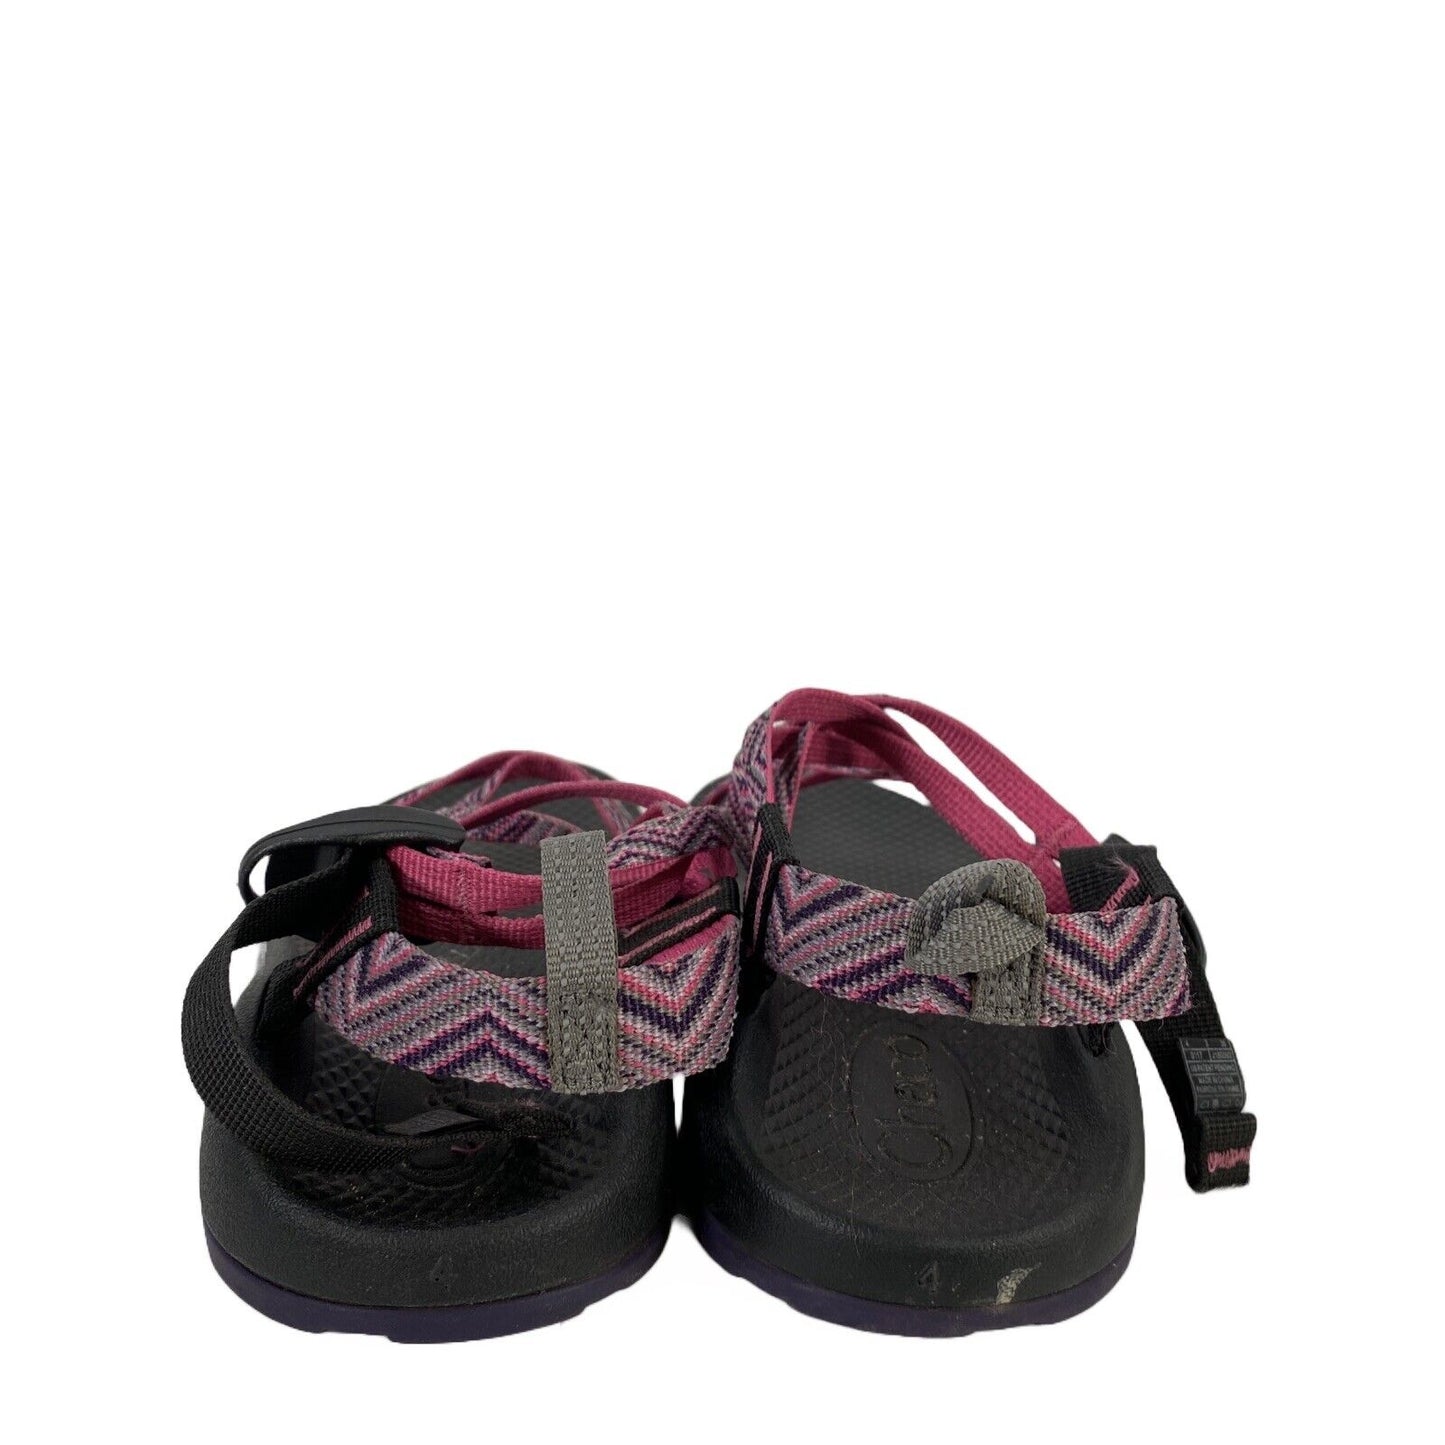 Chacos Girls Pink/Black Strappy ZX/1 Ecotread Sport Sandals - 4